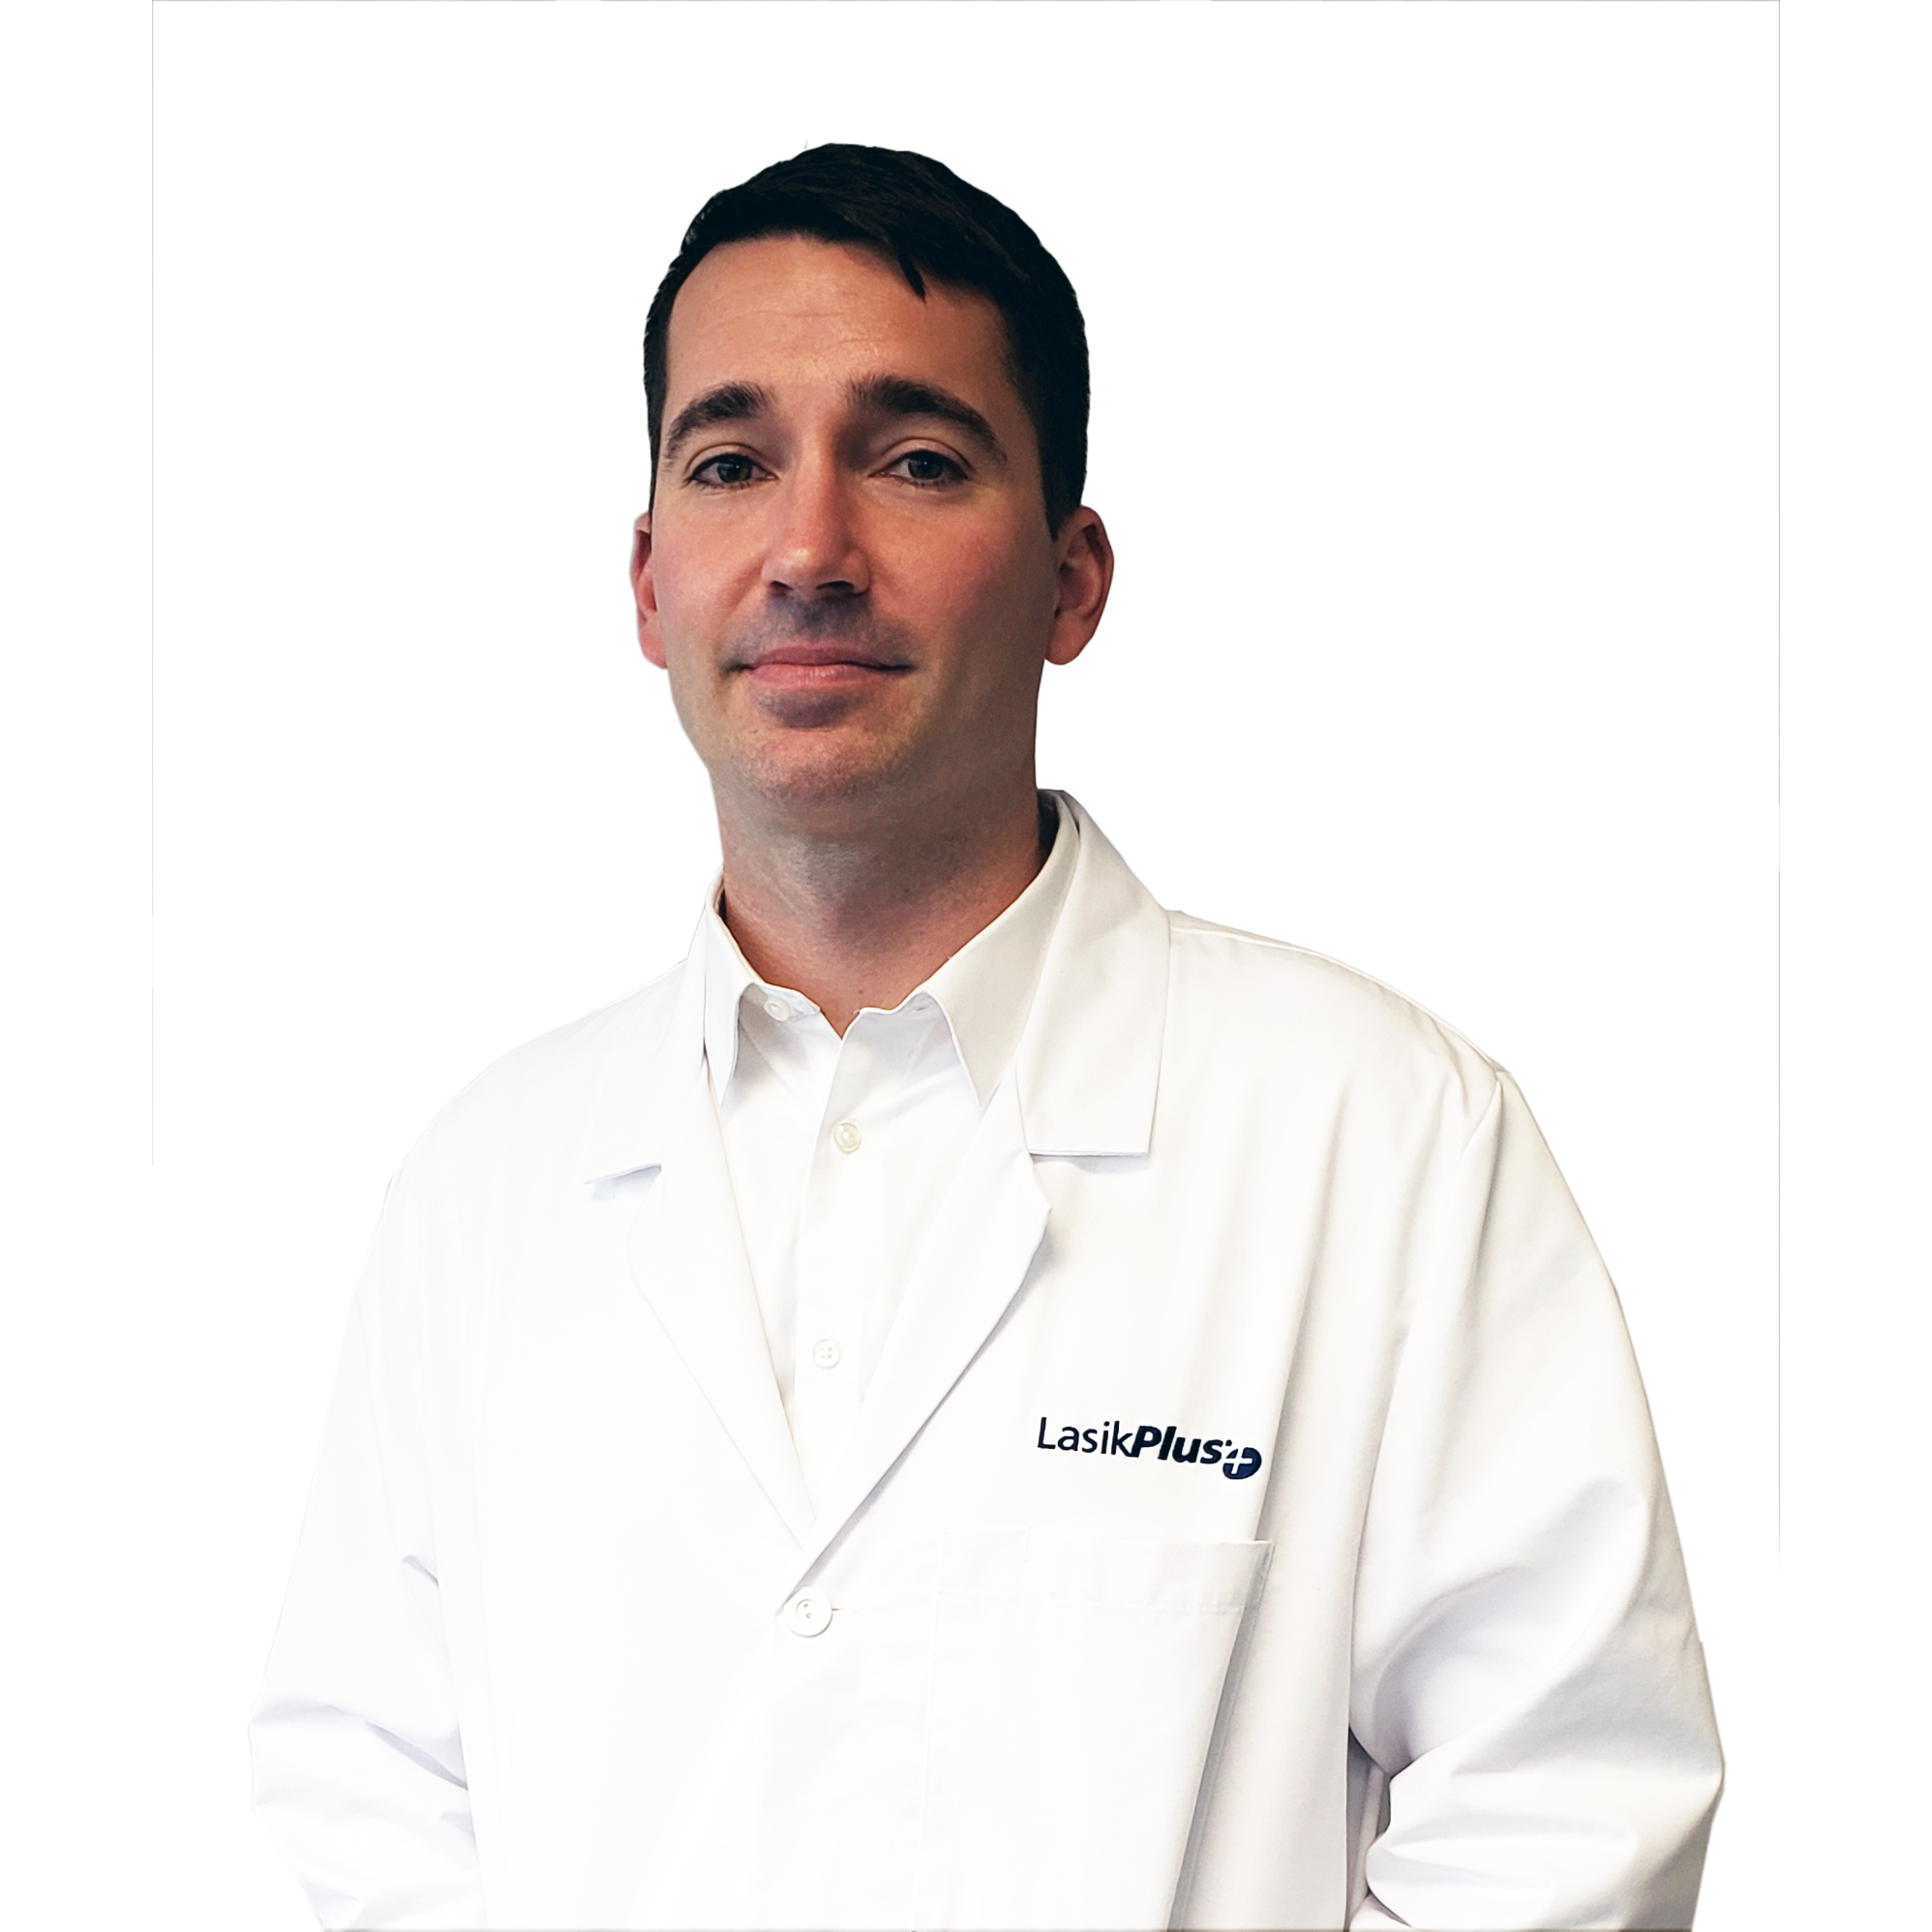 Dr. Paul Houghtaling - Towson, MD - Optometrist